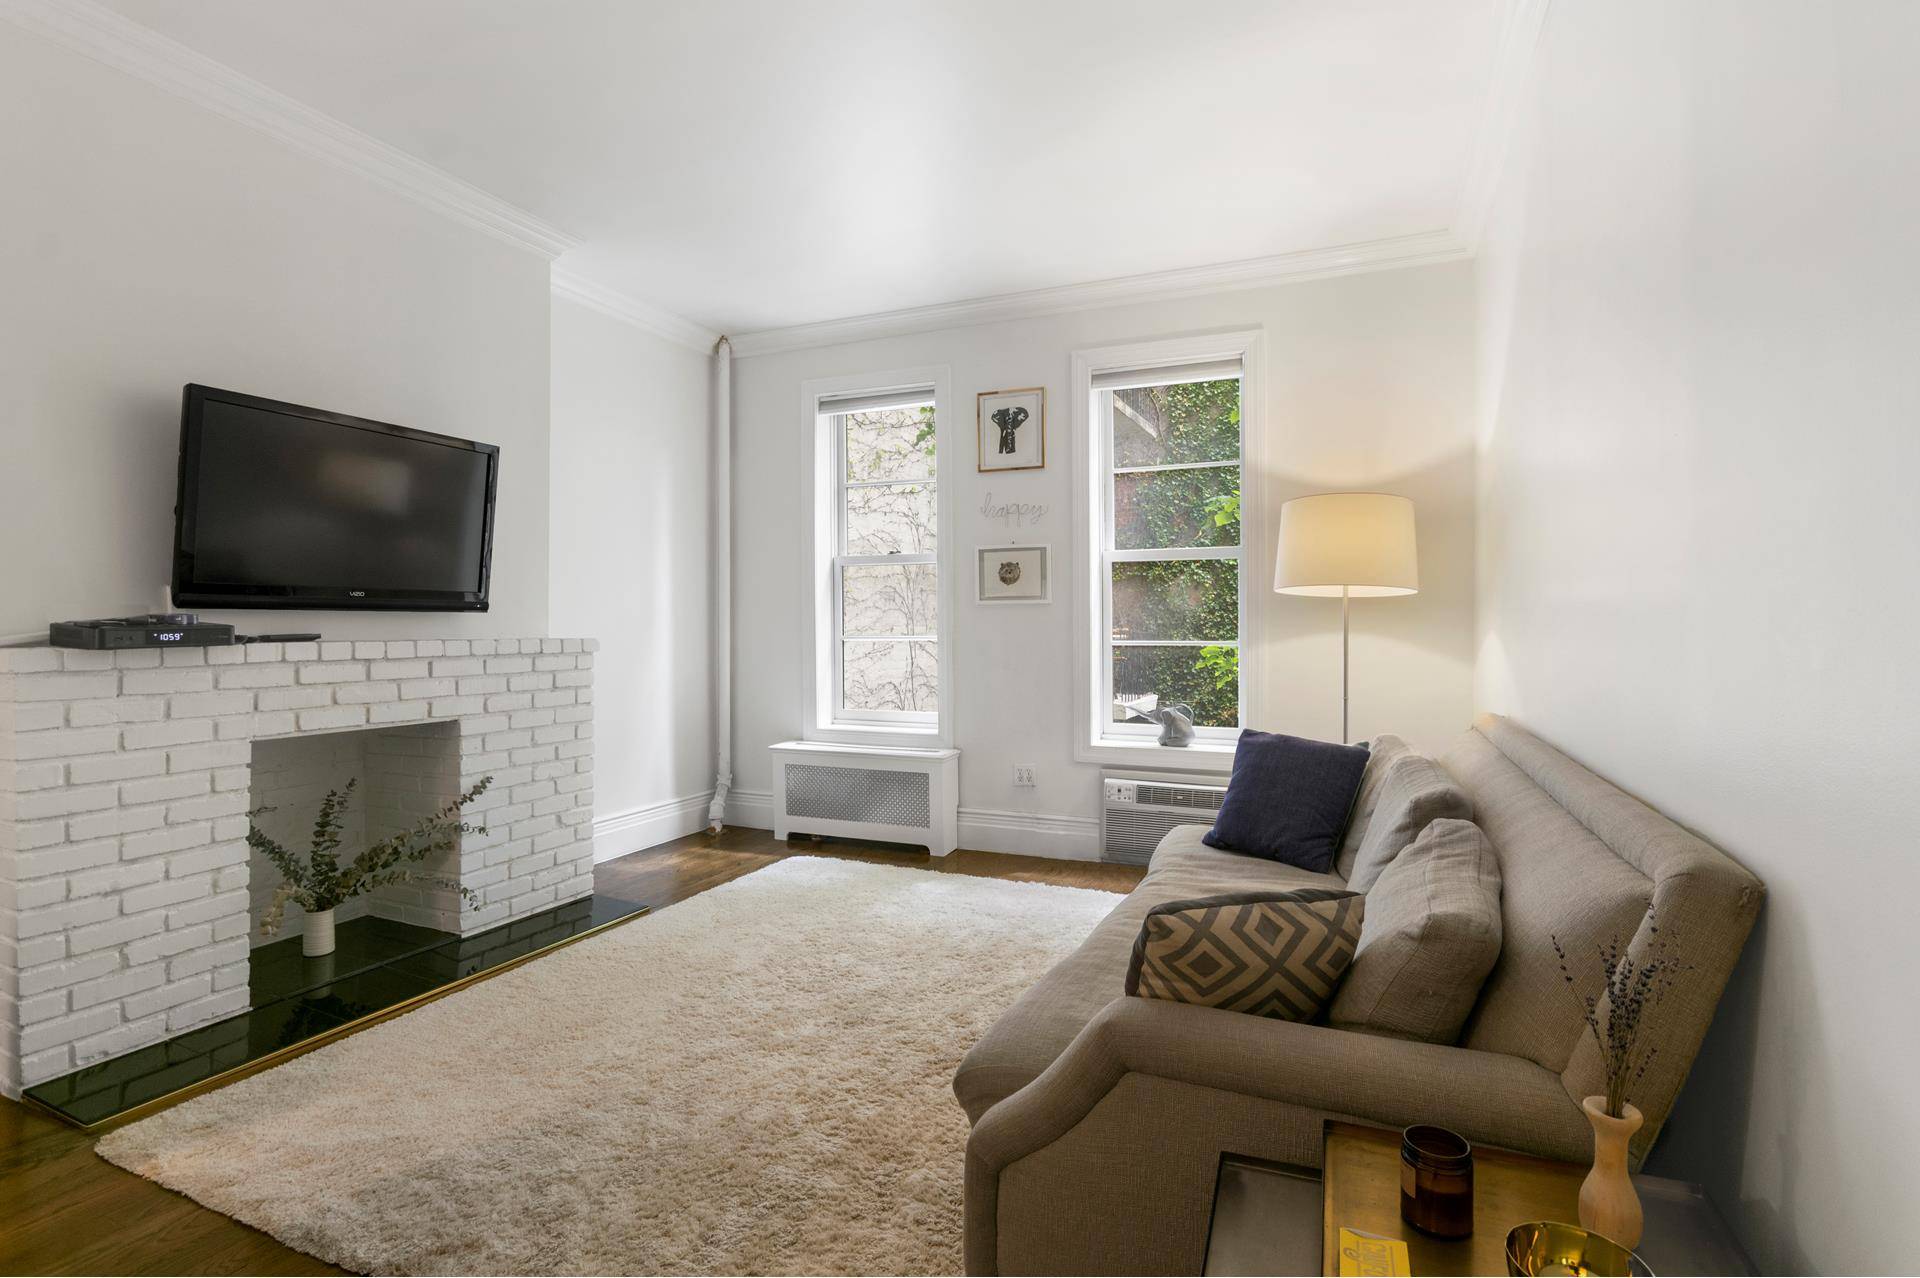 Located on a tranquil tree lined street in the heart of the West Village, this spacious one bedroom, one bathroom is in excellent condition with walnut oak plank floors, high ...